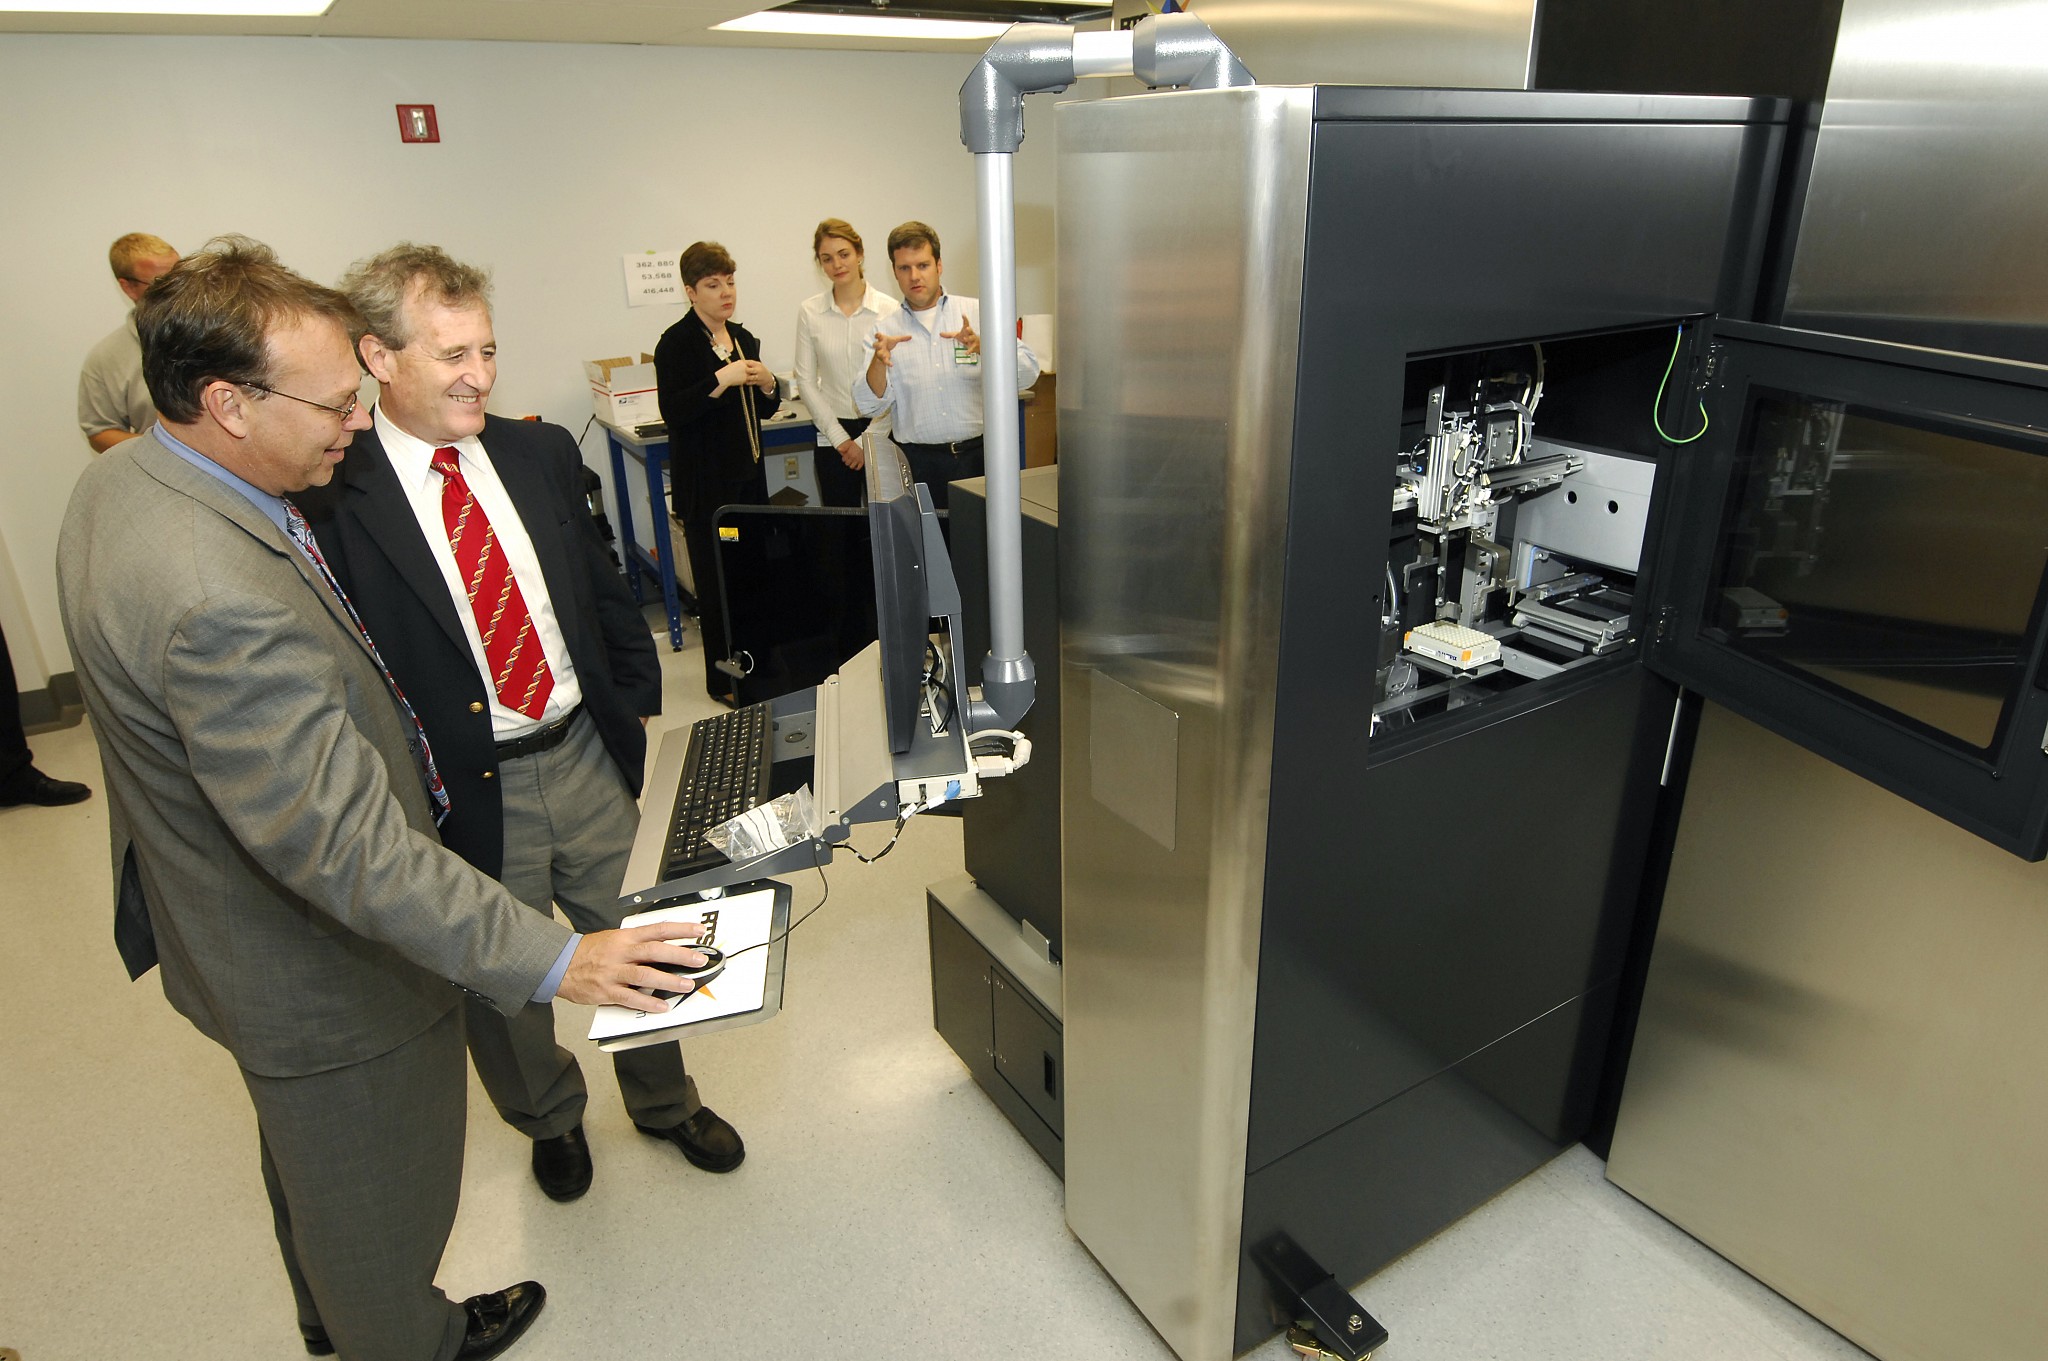 Jeff Balser, M.D., Ph.D., vice chancellor for Health Affairs, left, and Dan Roden, M.D., assistant vice chancellor for Personalized Medicine, explore the new machine. (Photo by Anne Rayner)